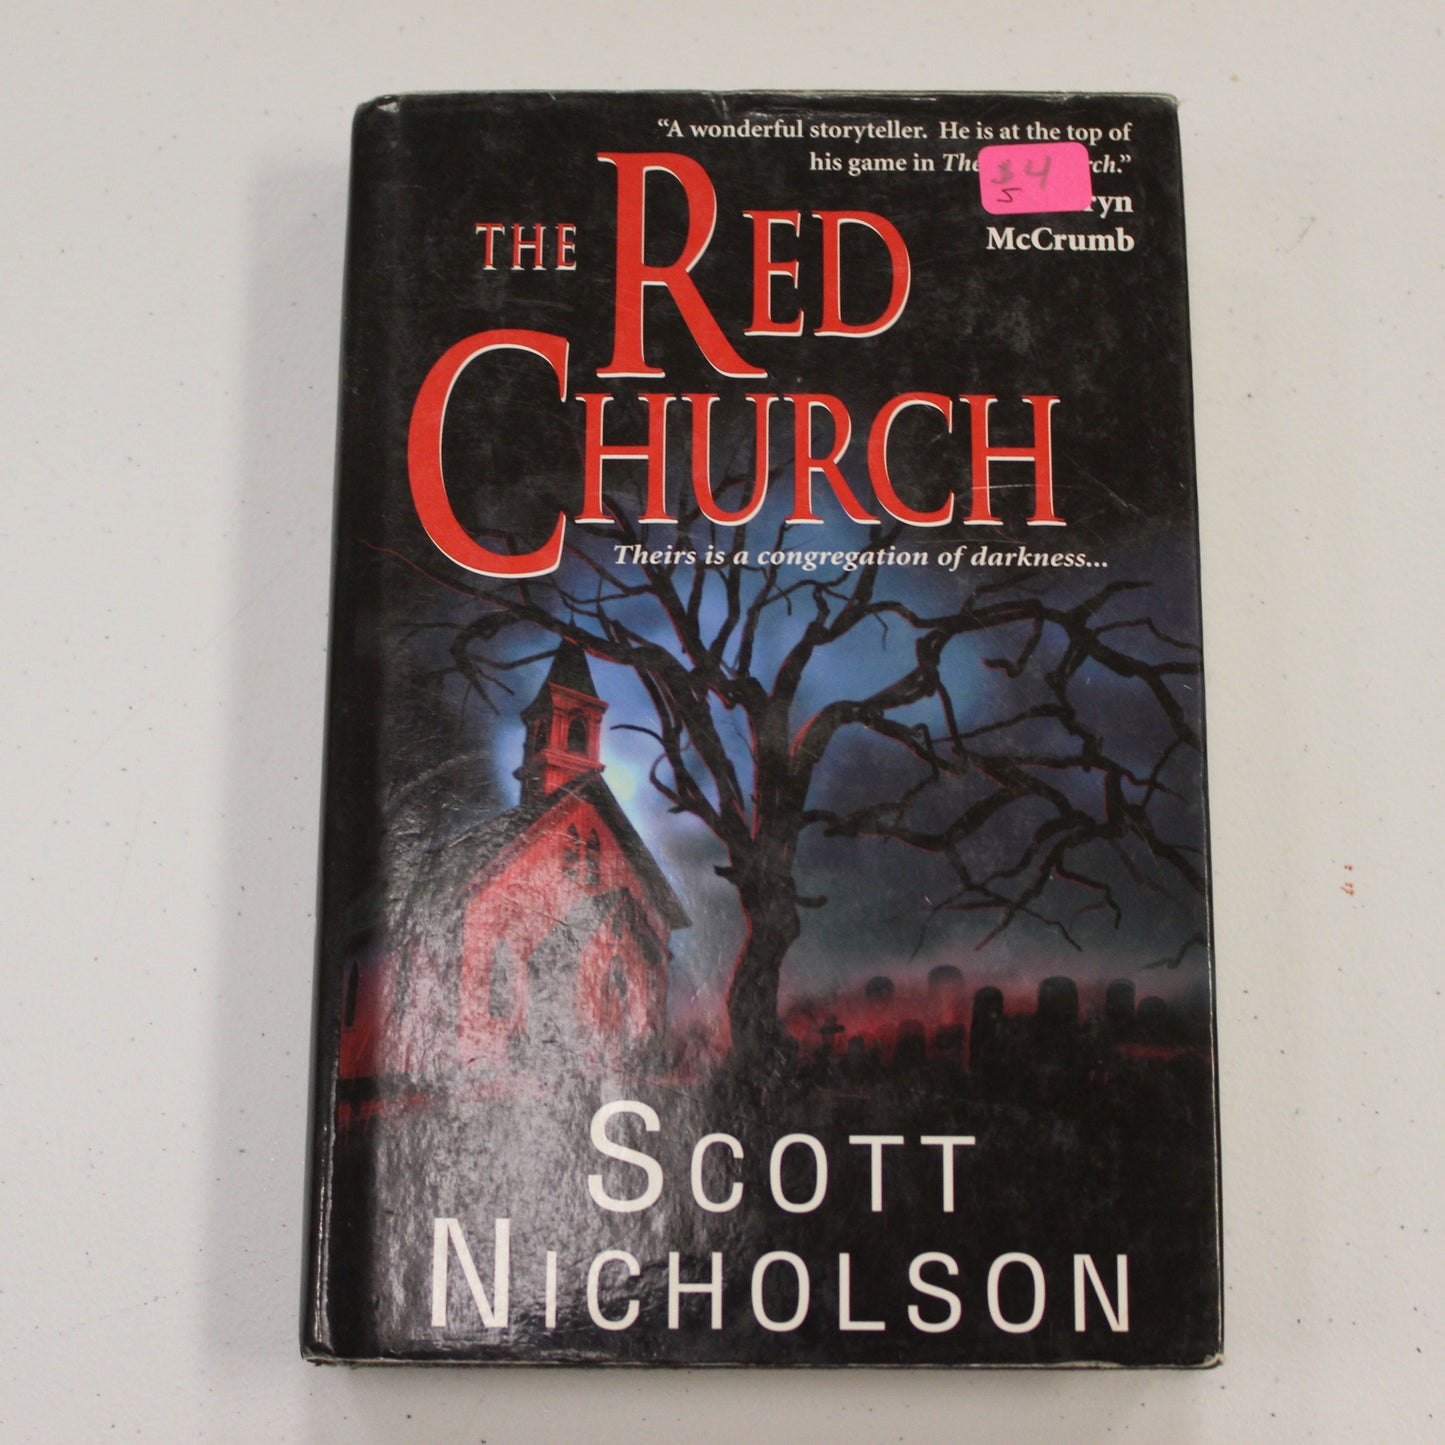 THE RED CHURCH